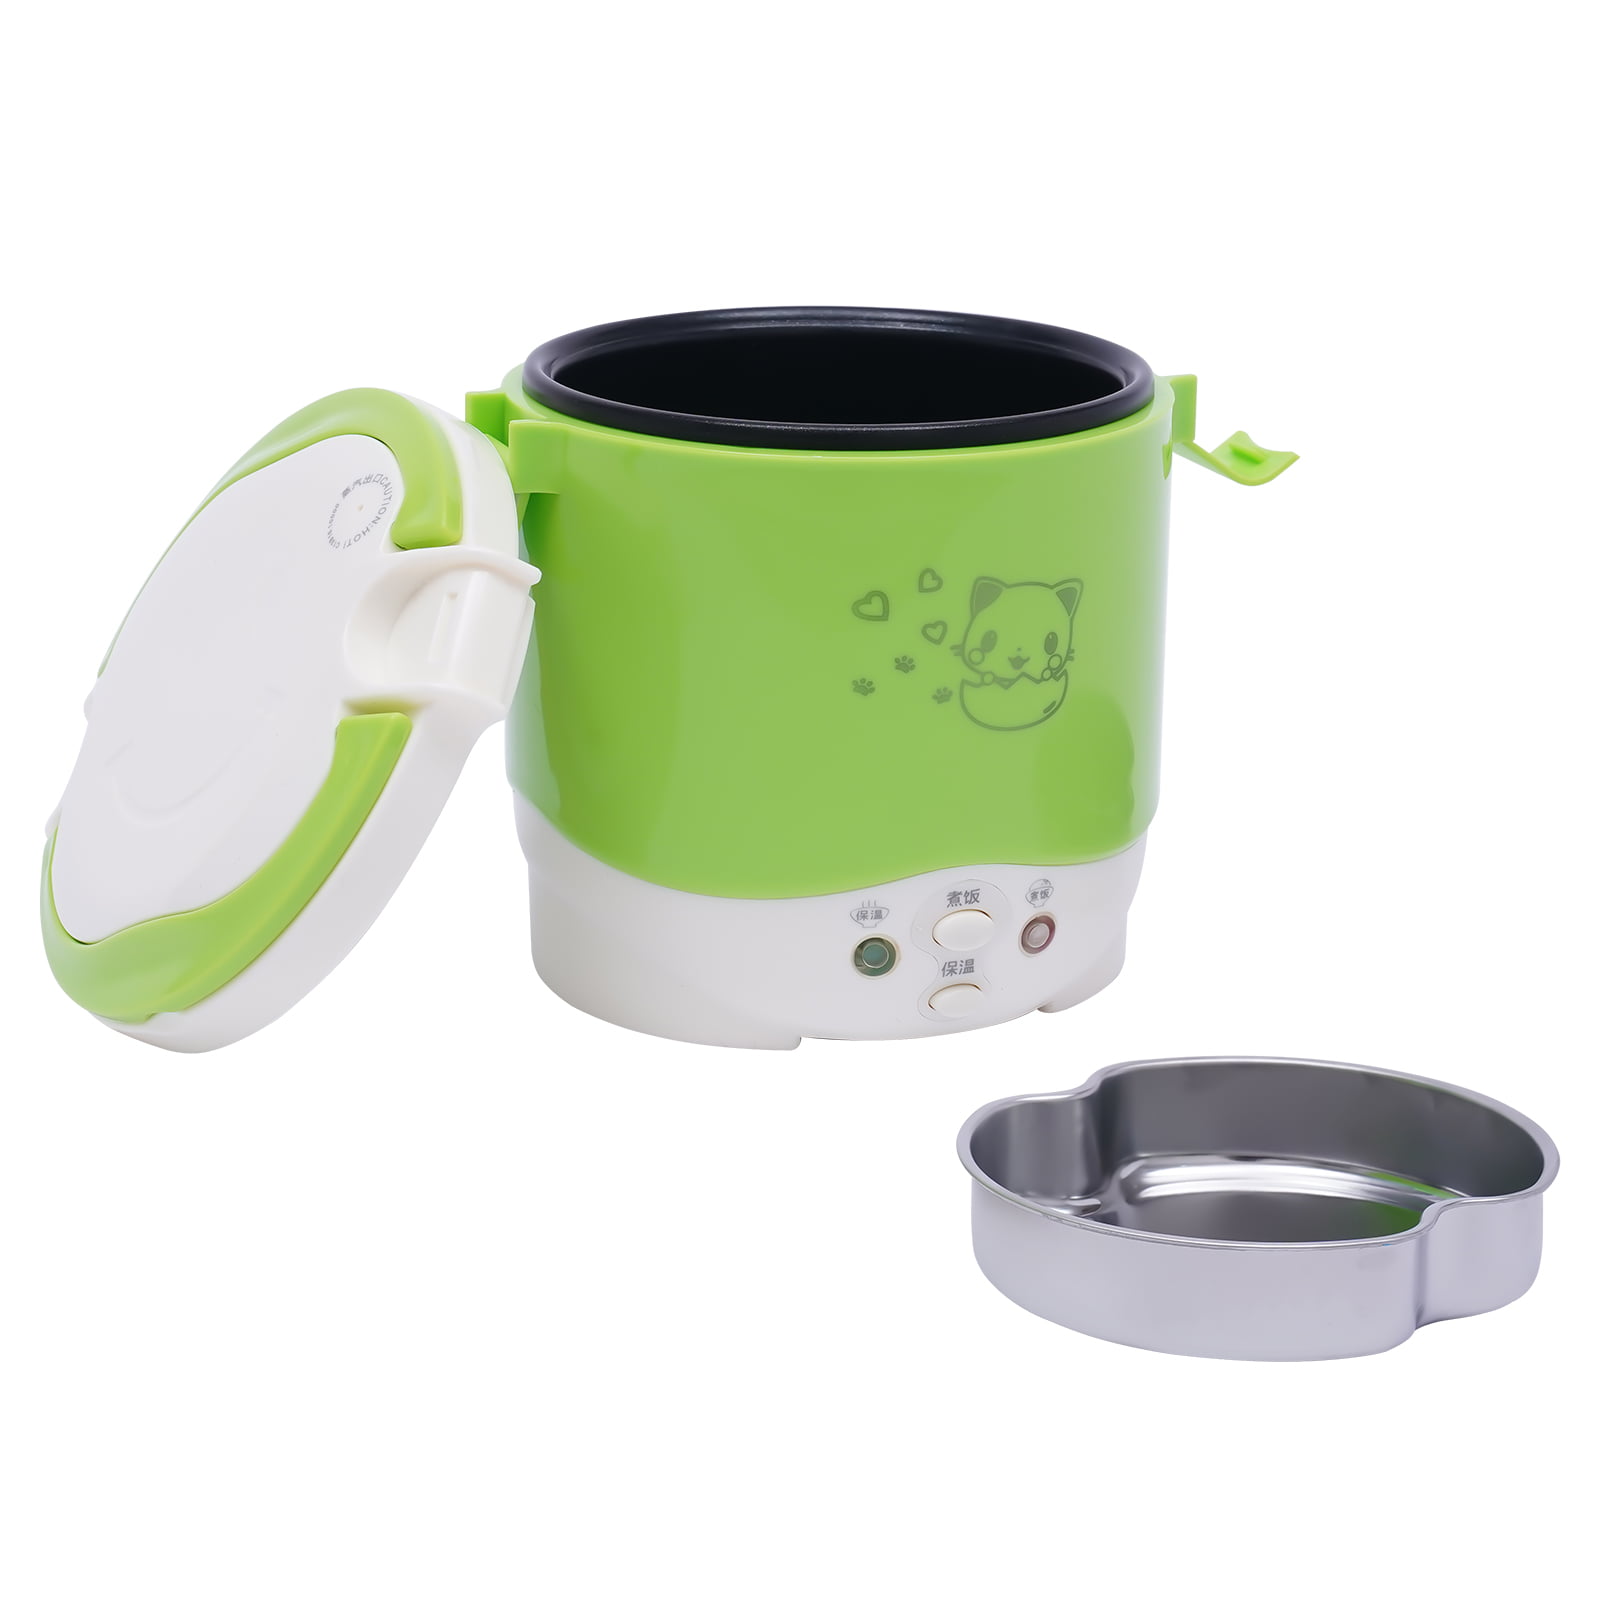 ZhdnBhnos 1 Cup Mini Rice Cooker Steamer 12V Portable Food Warmer Lunch Box  for Car Cooking for Soup Porridge Rice